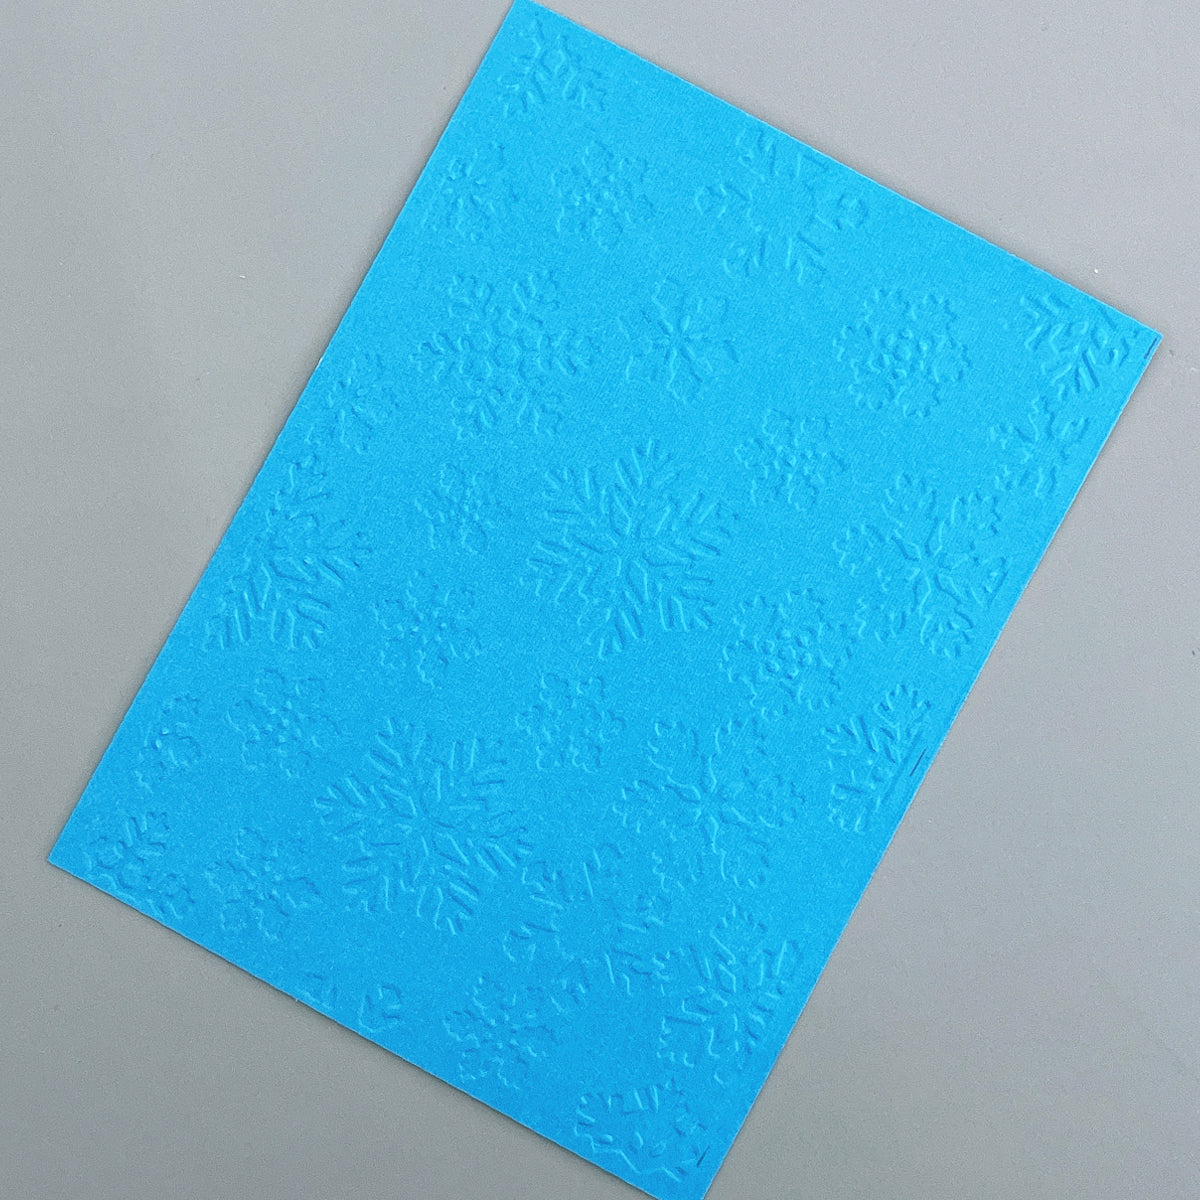 Estivaux Sea Wave Embossing Folders for Card Making, 5.7 × 4.2 Inch Cirrus  Plastic Embossing Folders Summer Sea Template Stencil Craft Card Embossing